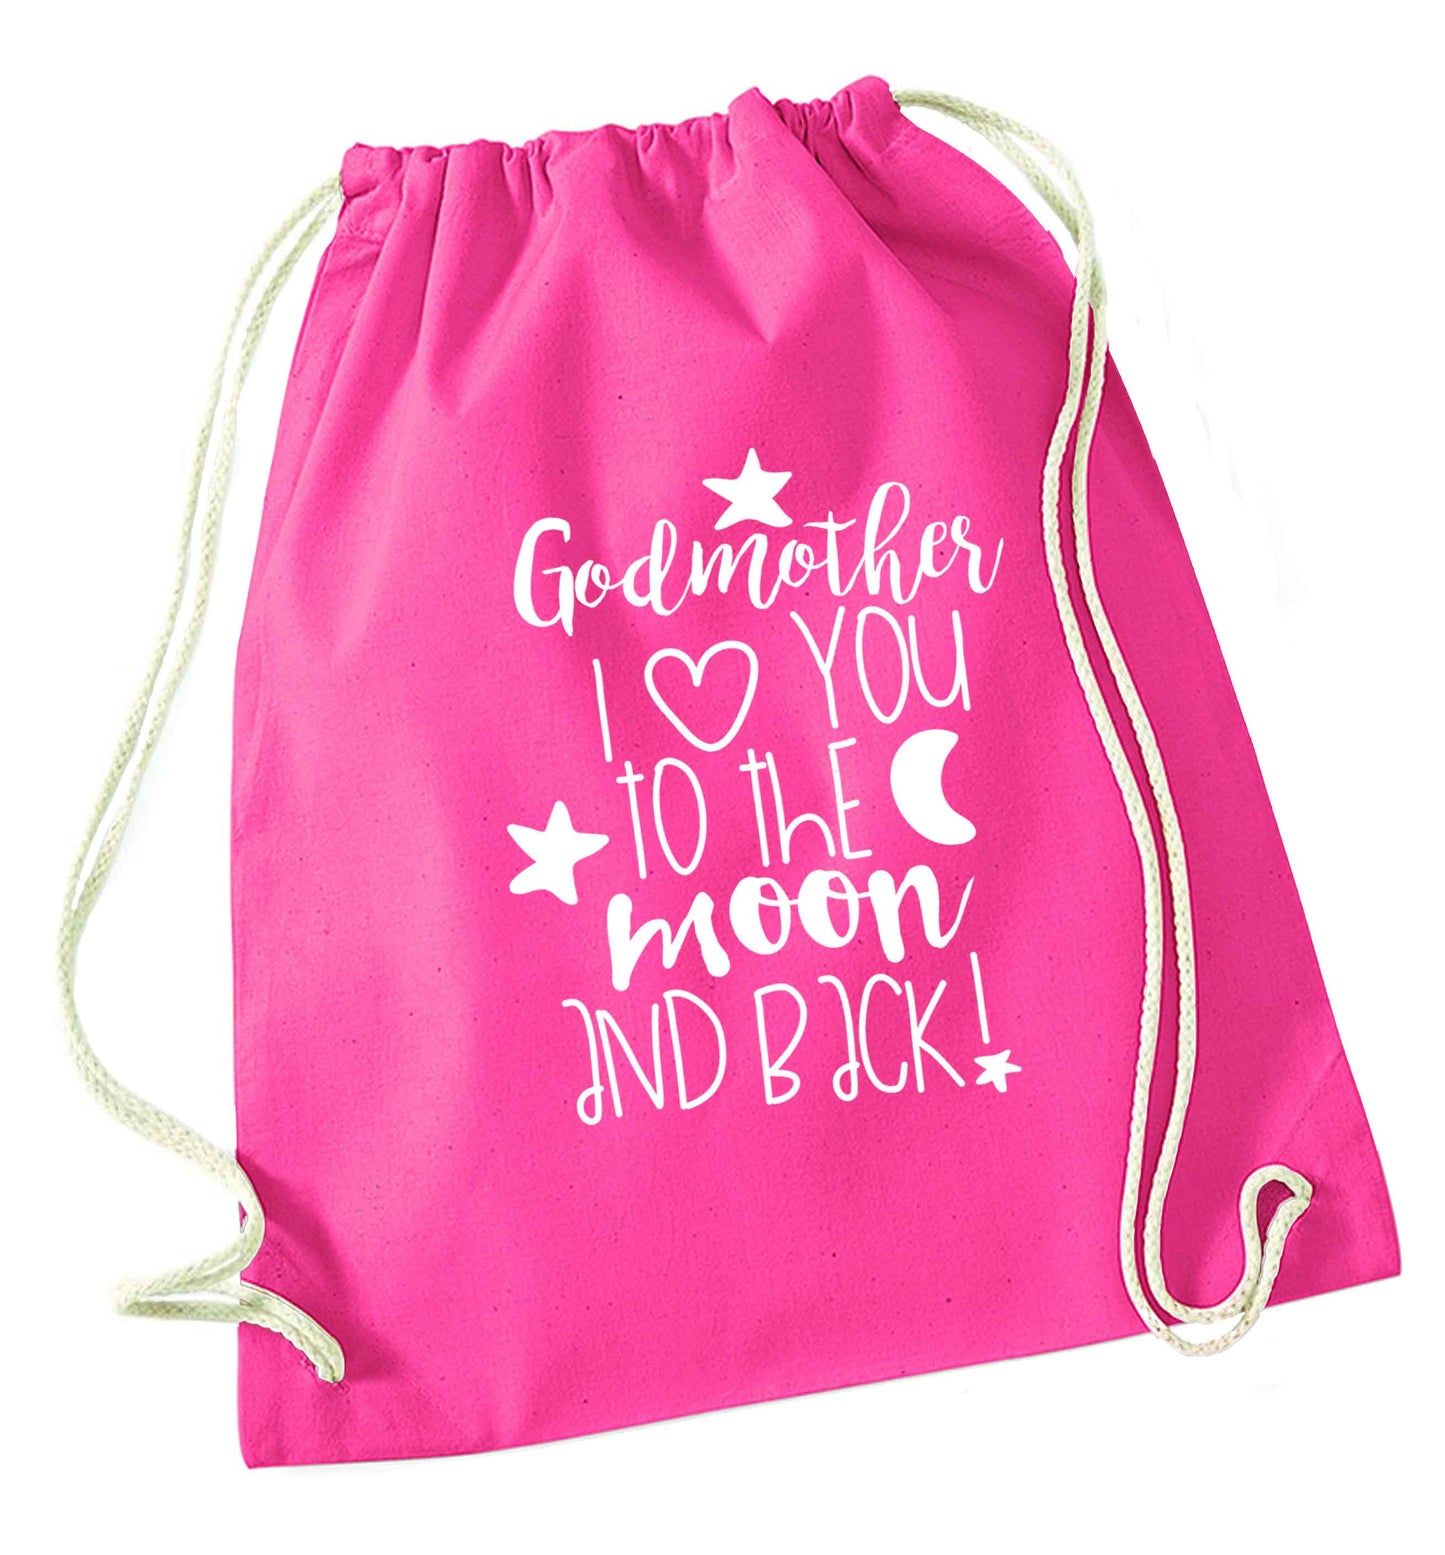 Godmother I love you to the moon and back pink drawstring bag